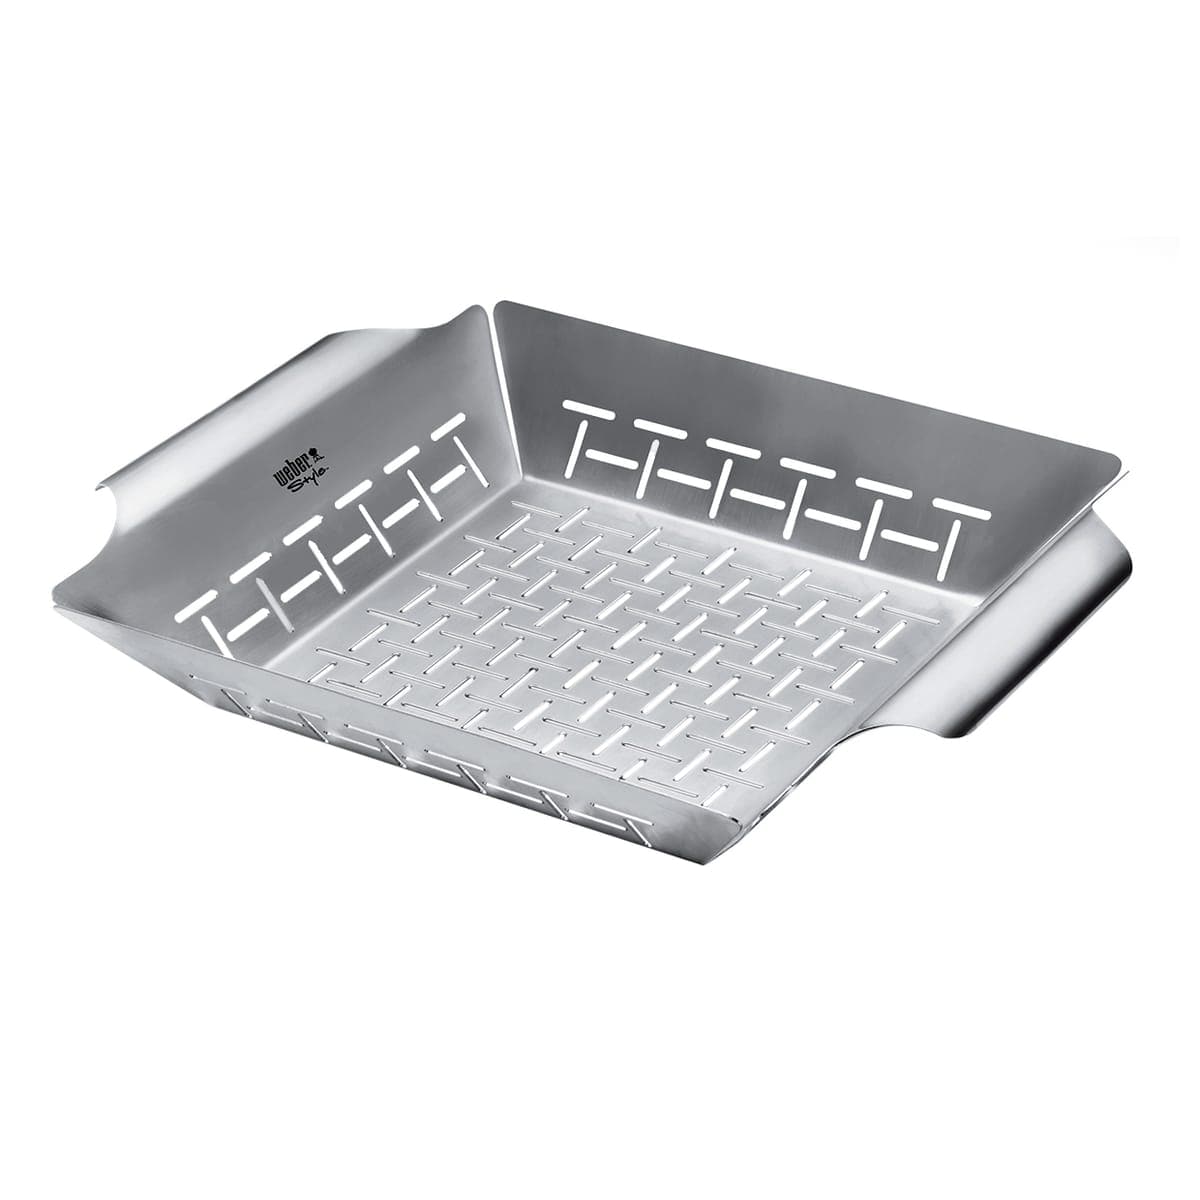 WEBER STAINLESS STEEL VEGETABLE TRAY 34 X 38 X 5 CM